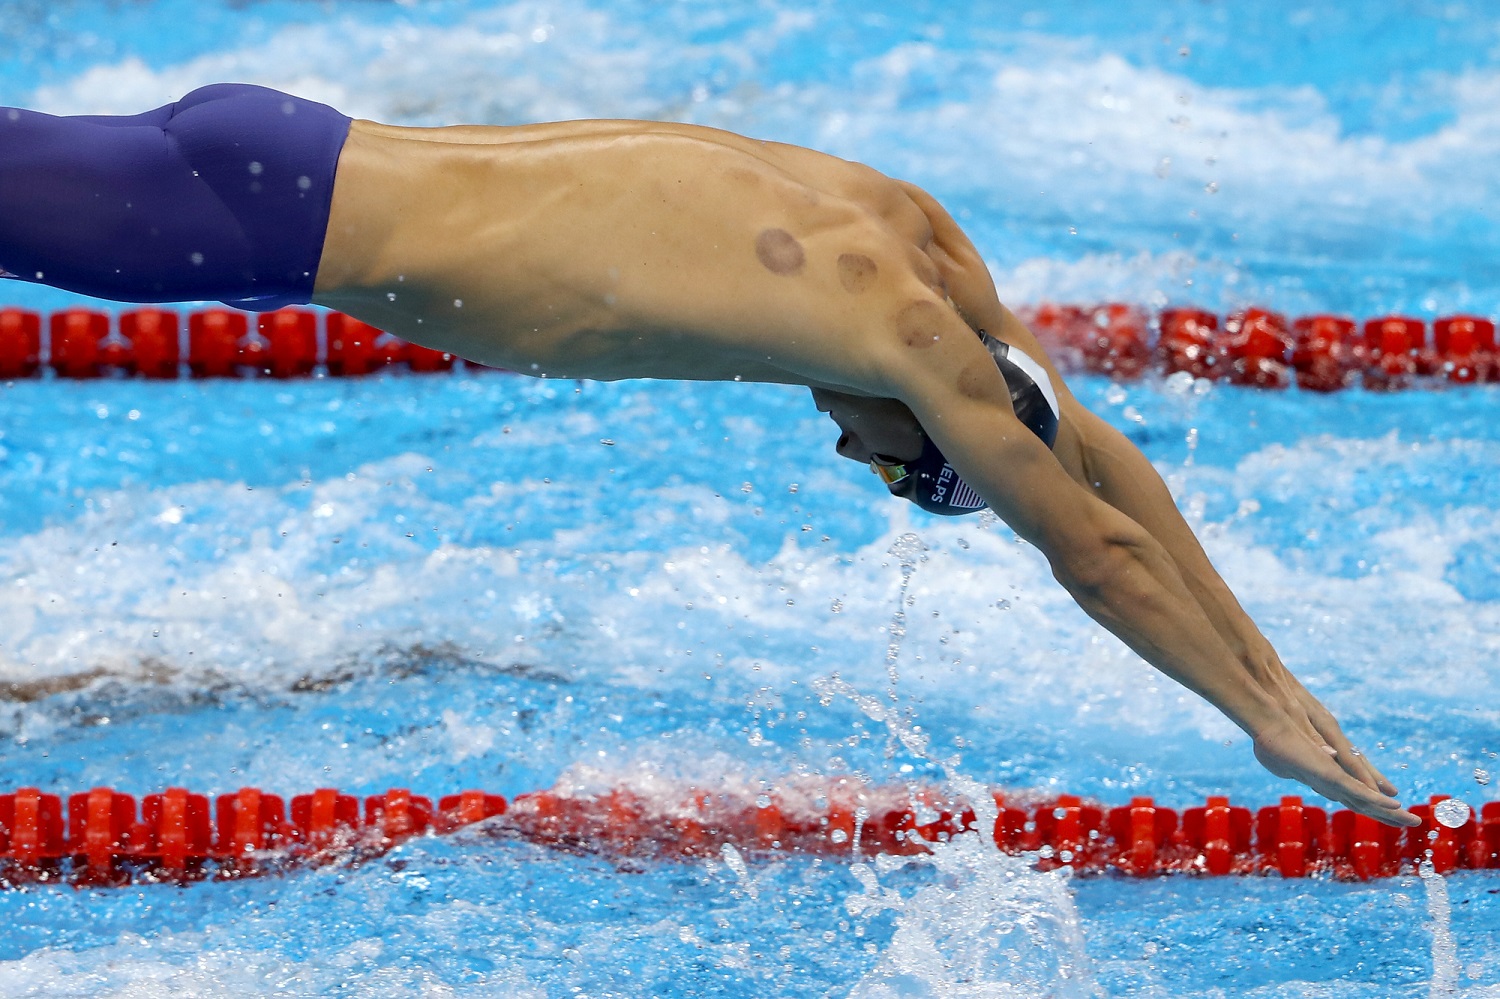 Why does Michael Phelps have purple spots on his back?